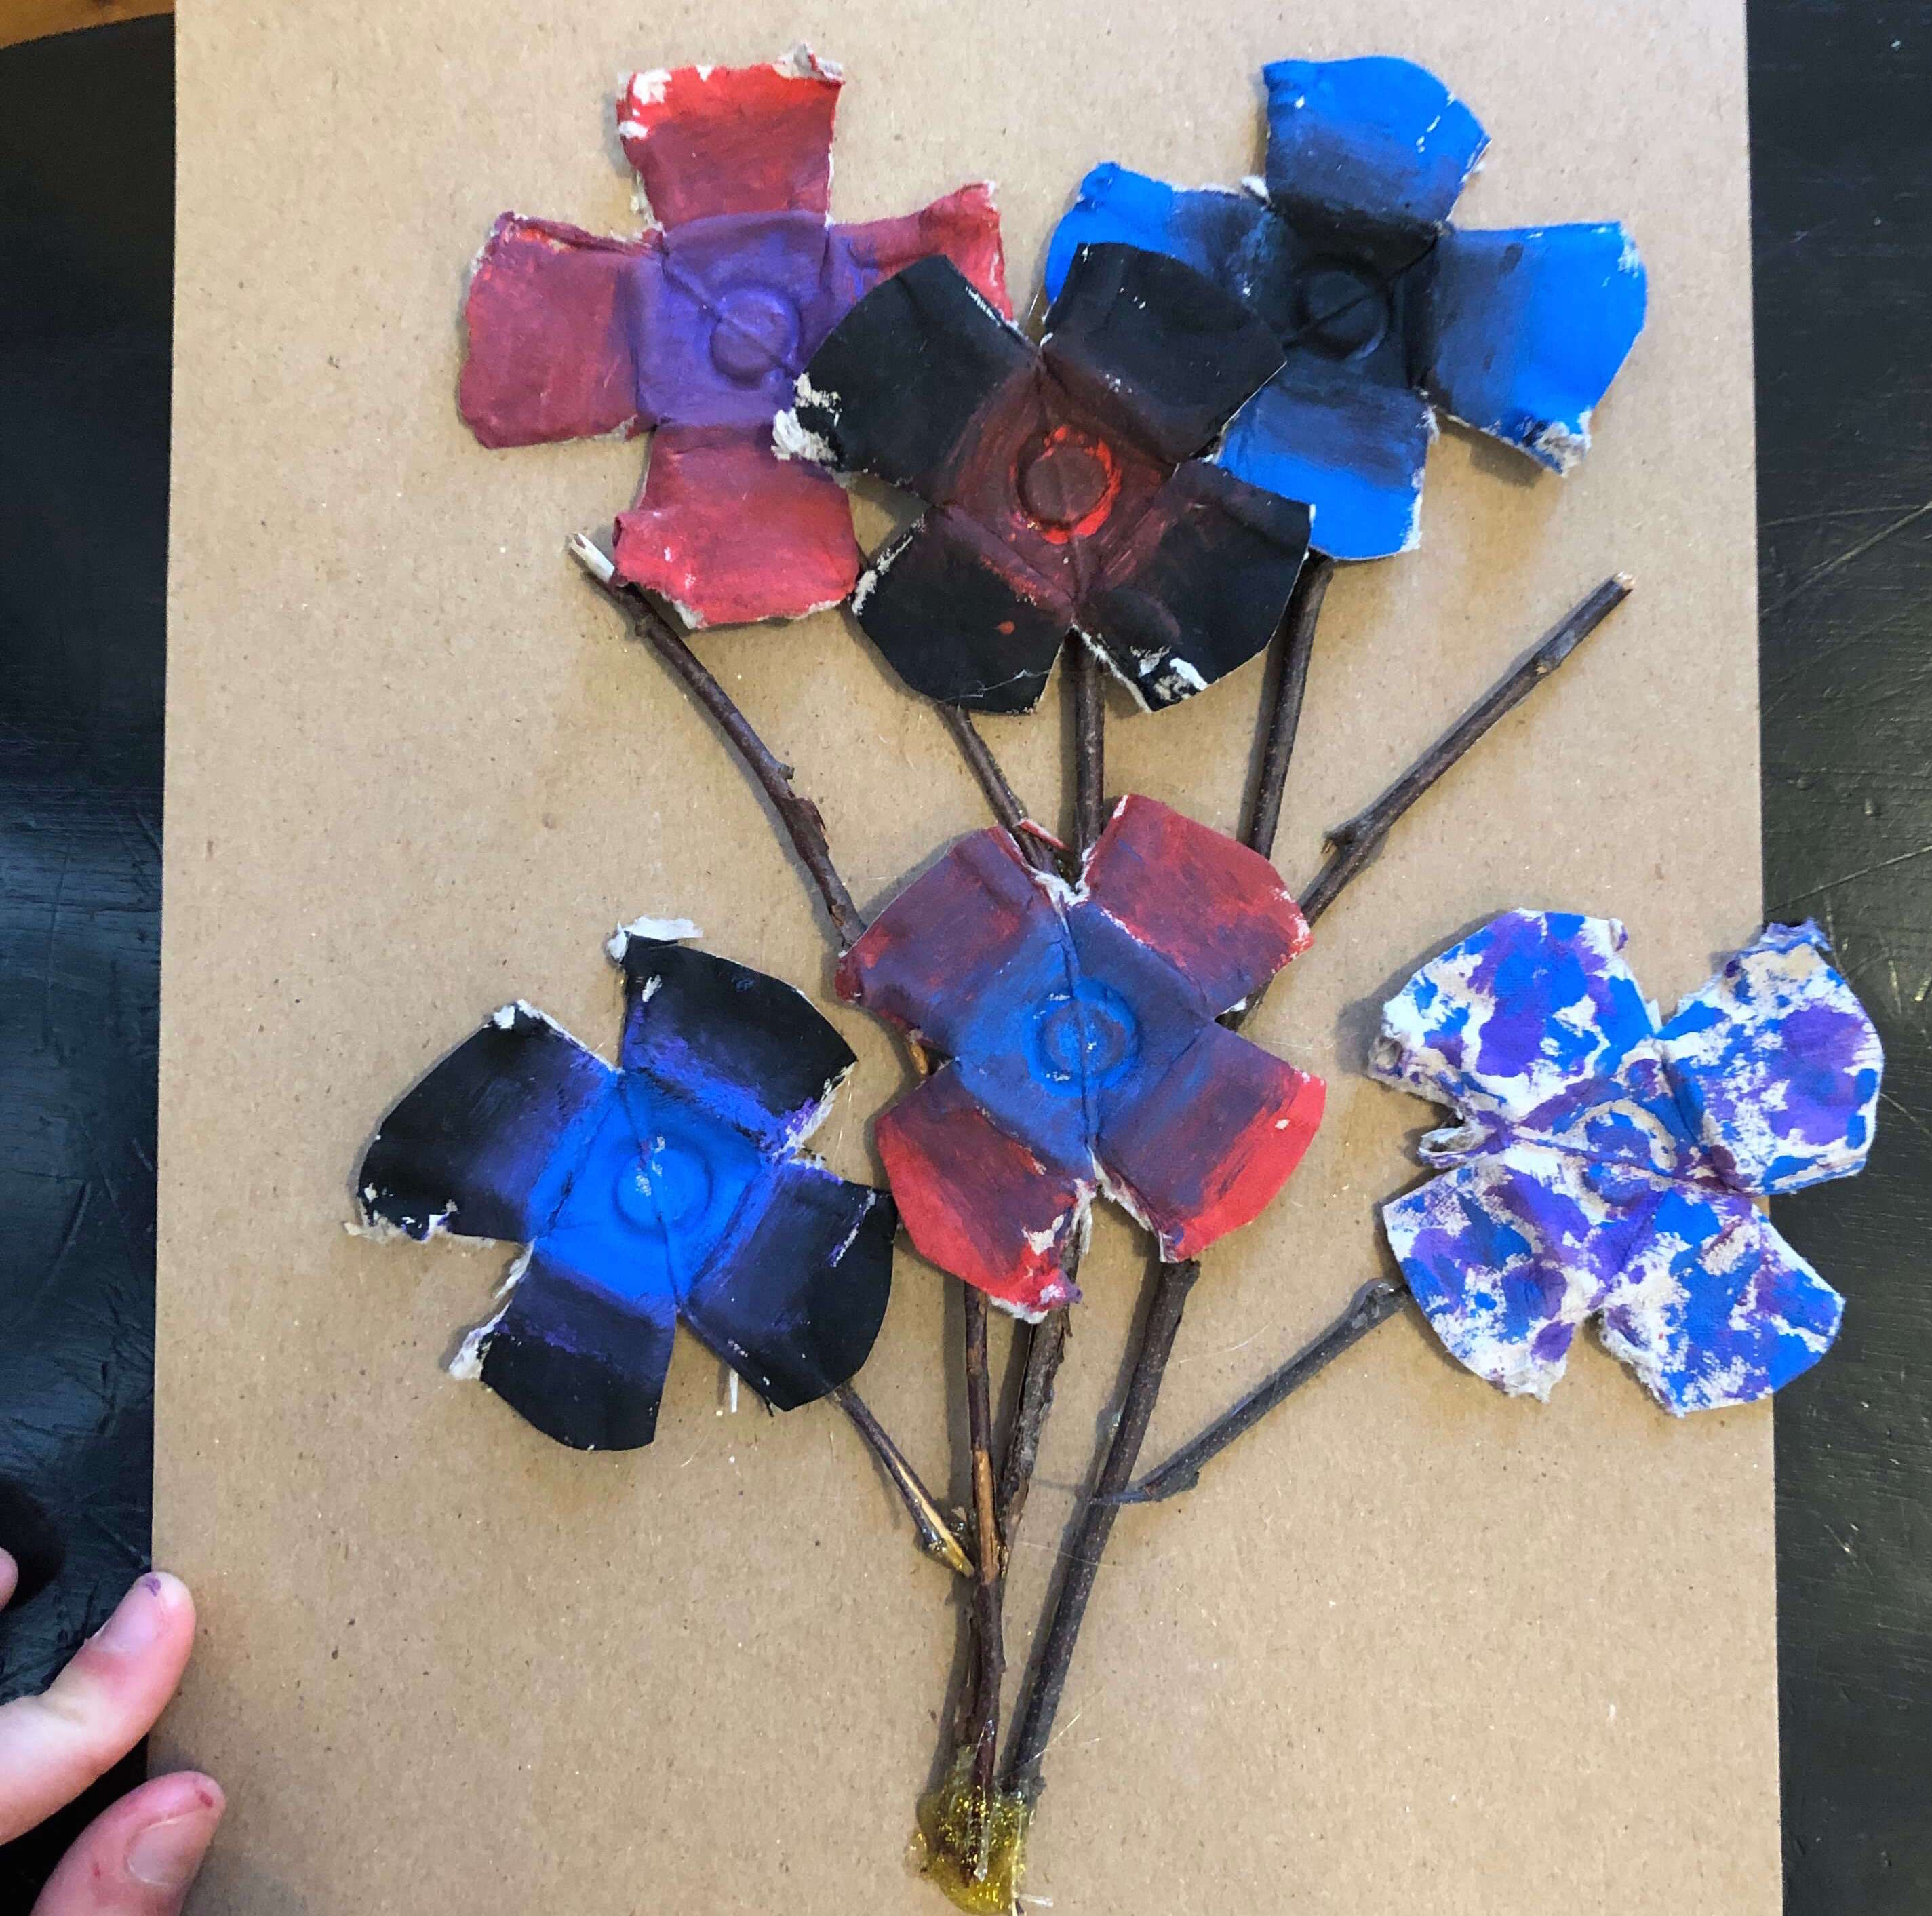 painted egg carton flowers and stems